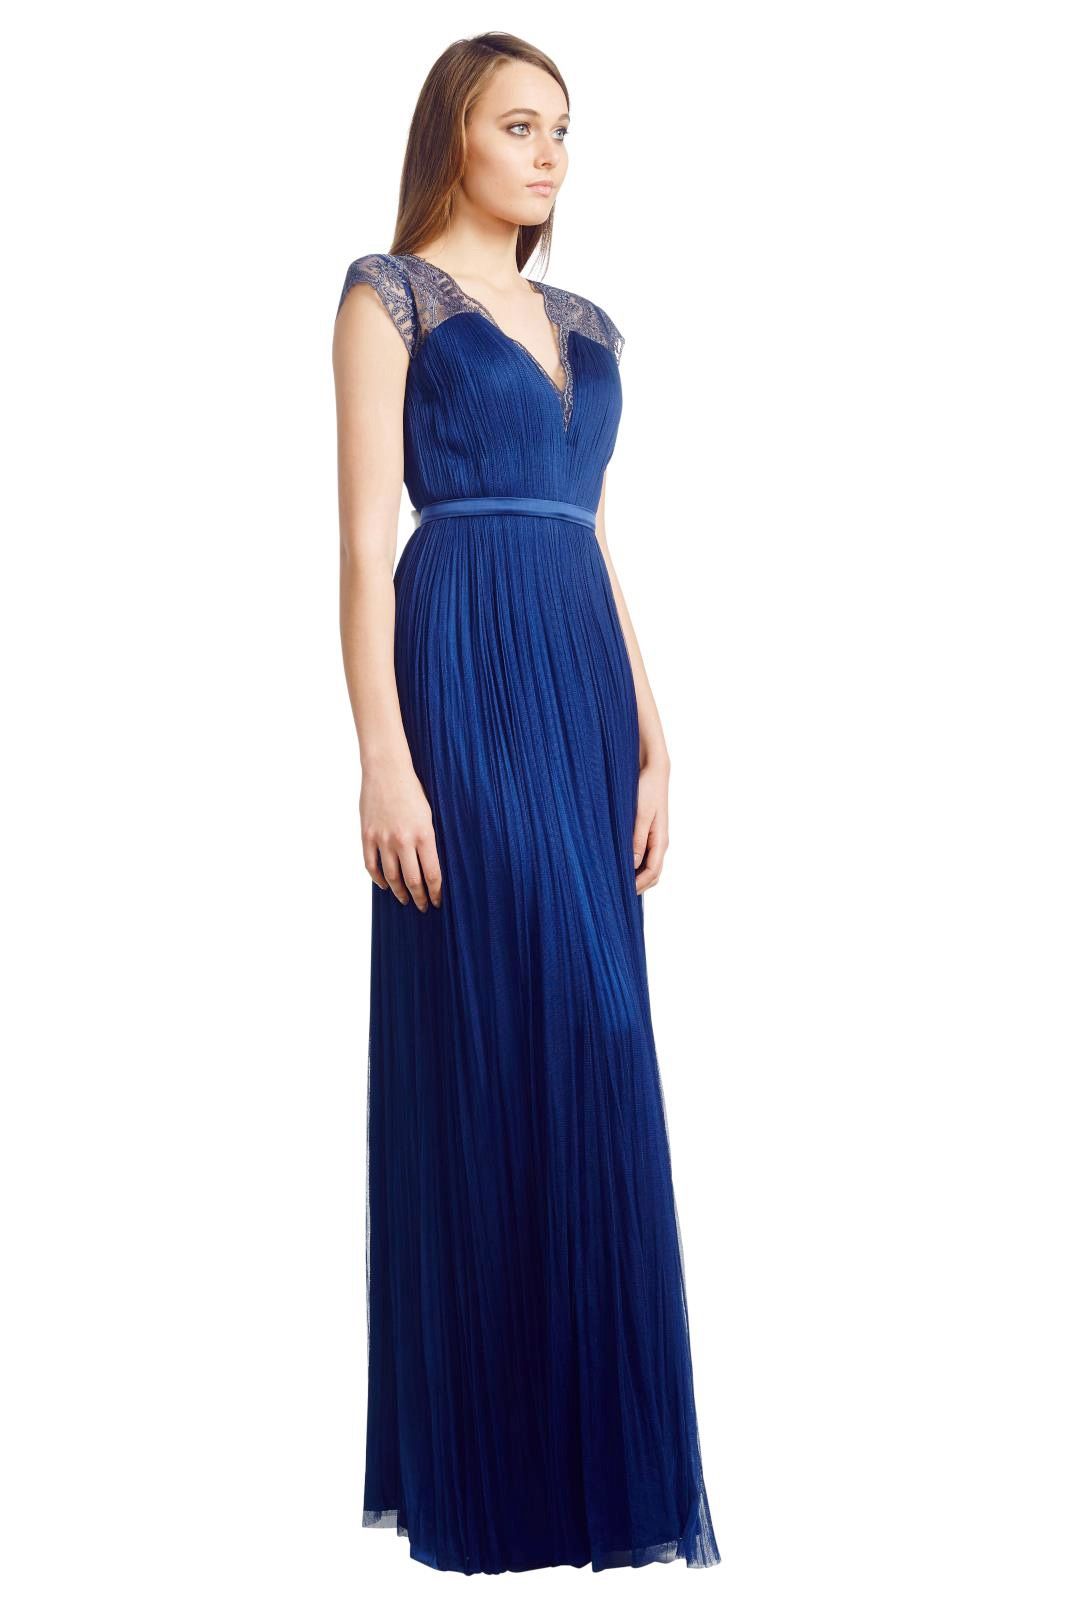 Catherine Deane - Silk Tulle Gown - Blue - Side